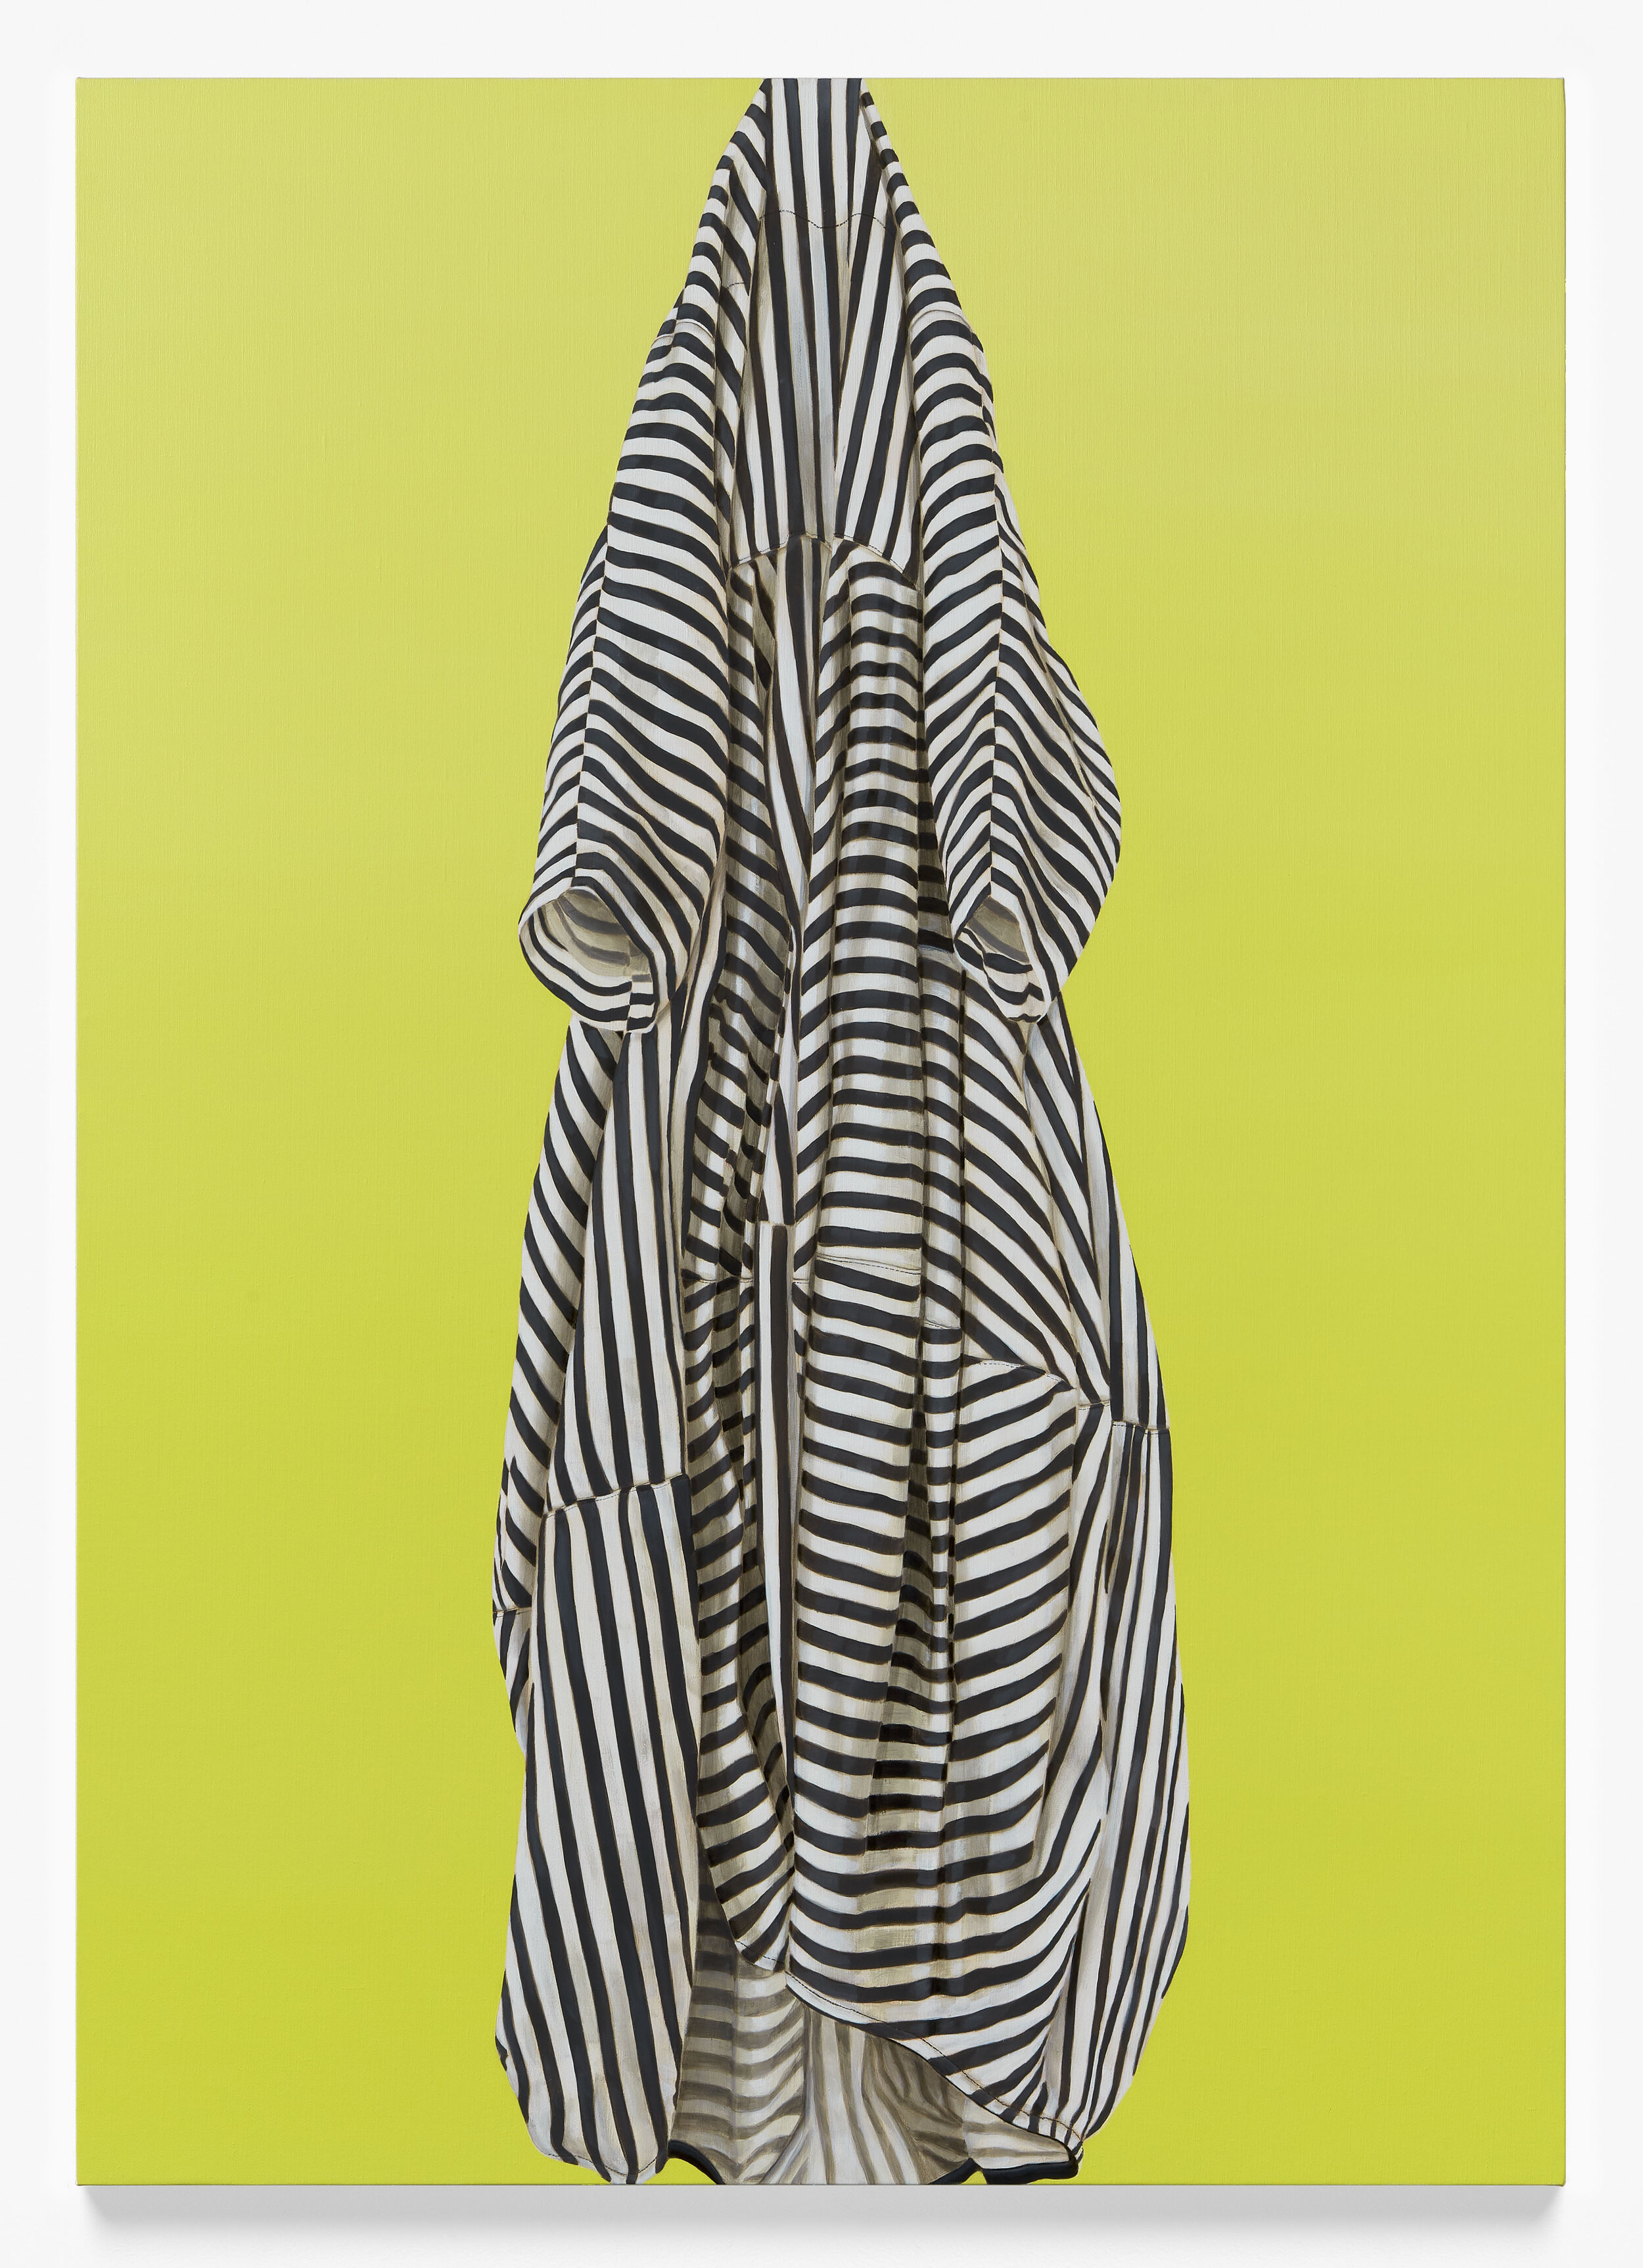  Jan Murray,  Andrea's Dress (Hanging) , 2020, oil on linen, 153 x 107cm; courtesy the artist and Charles Nodrum Gallery, Melbourne 